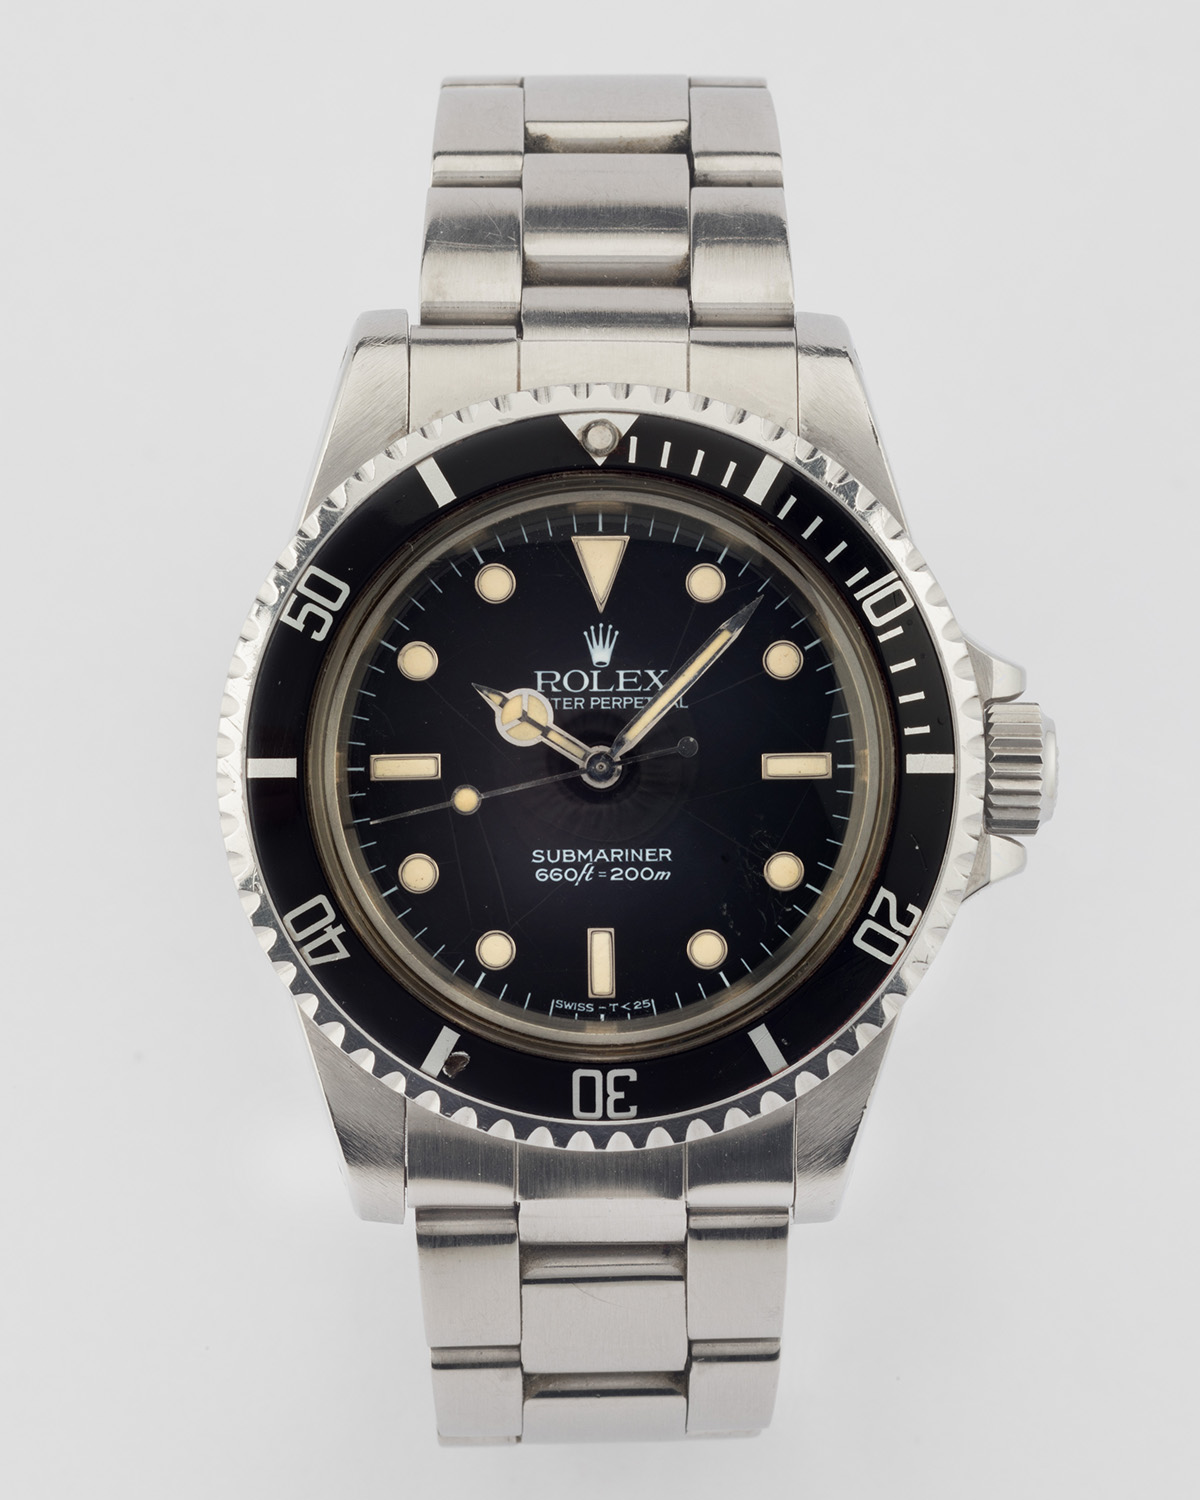 Vintage Rolex Submariner with glossy 